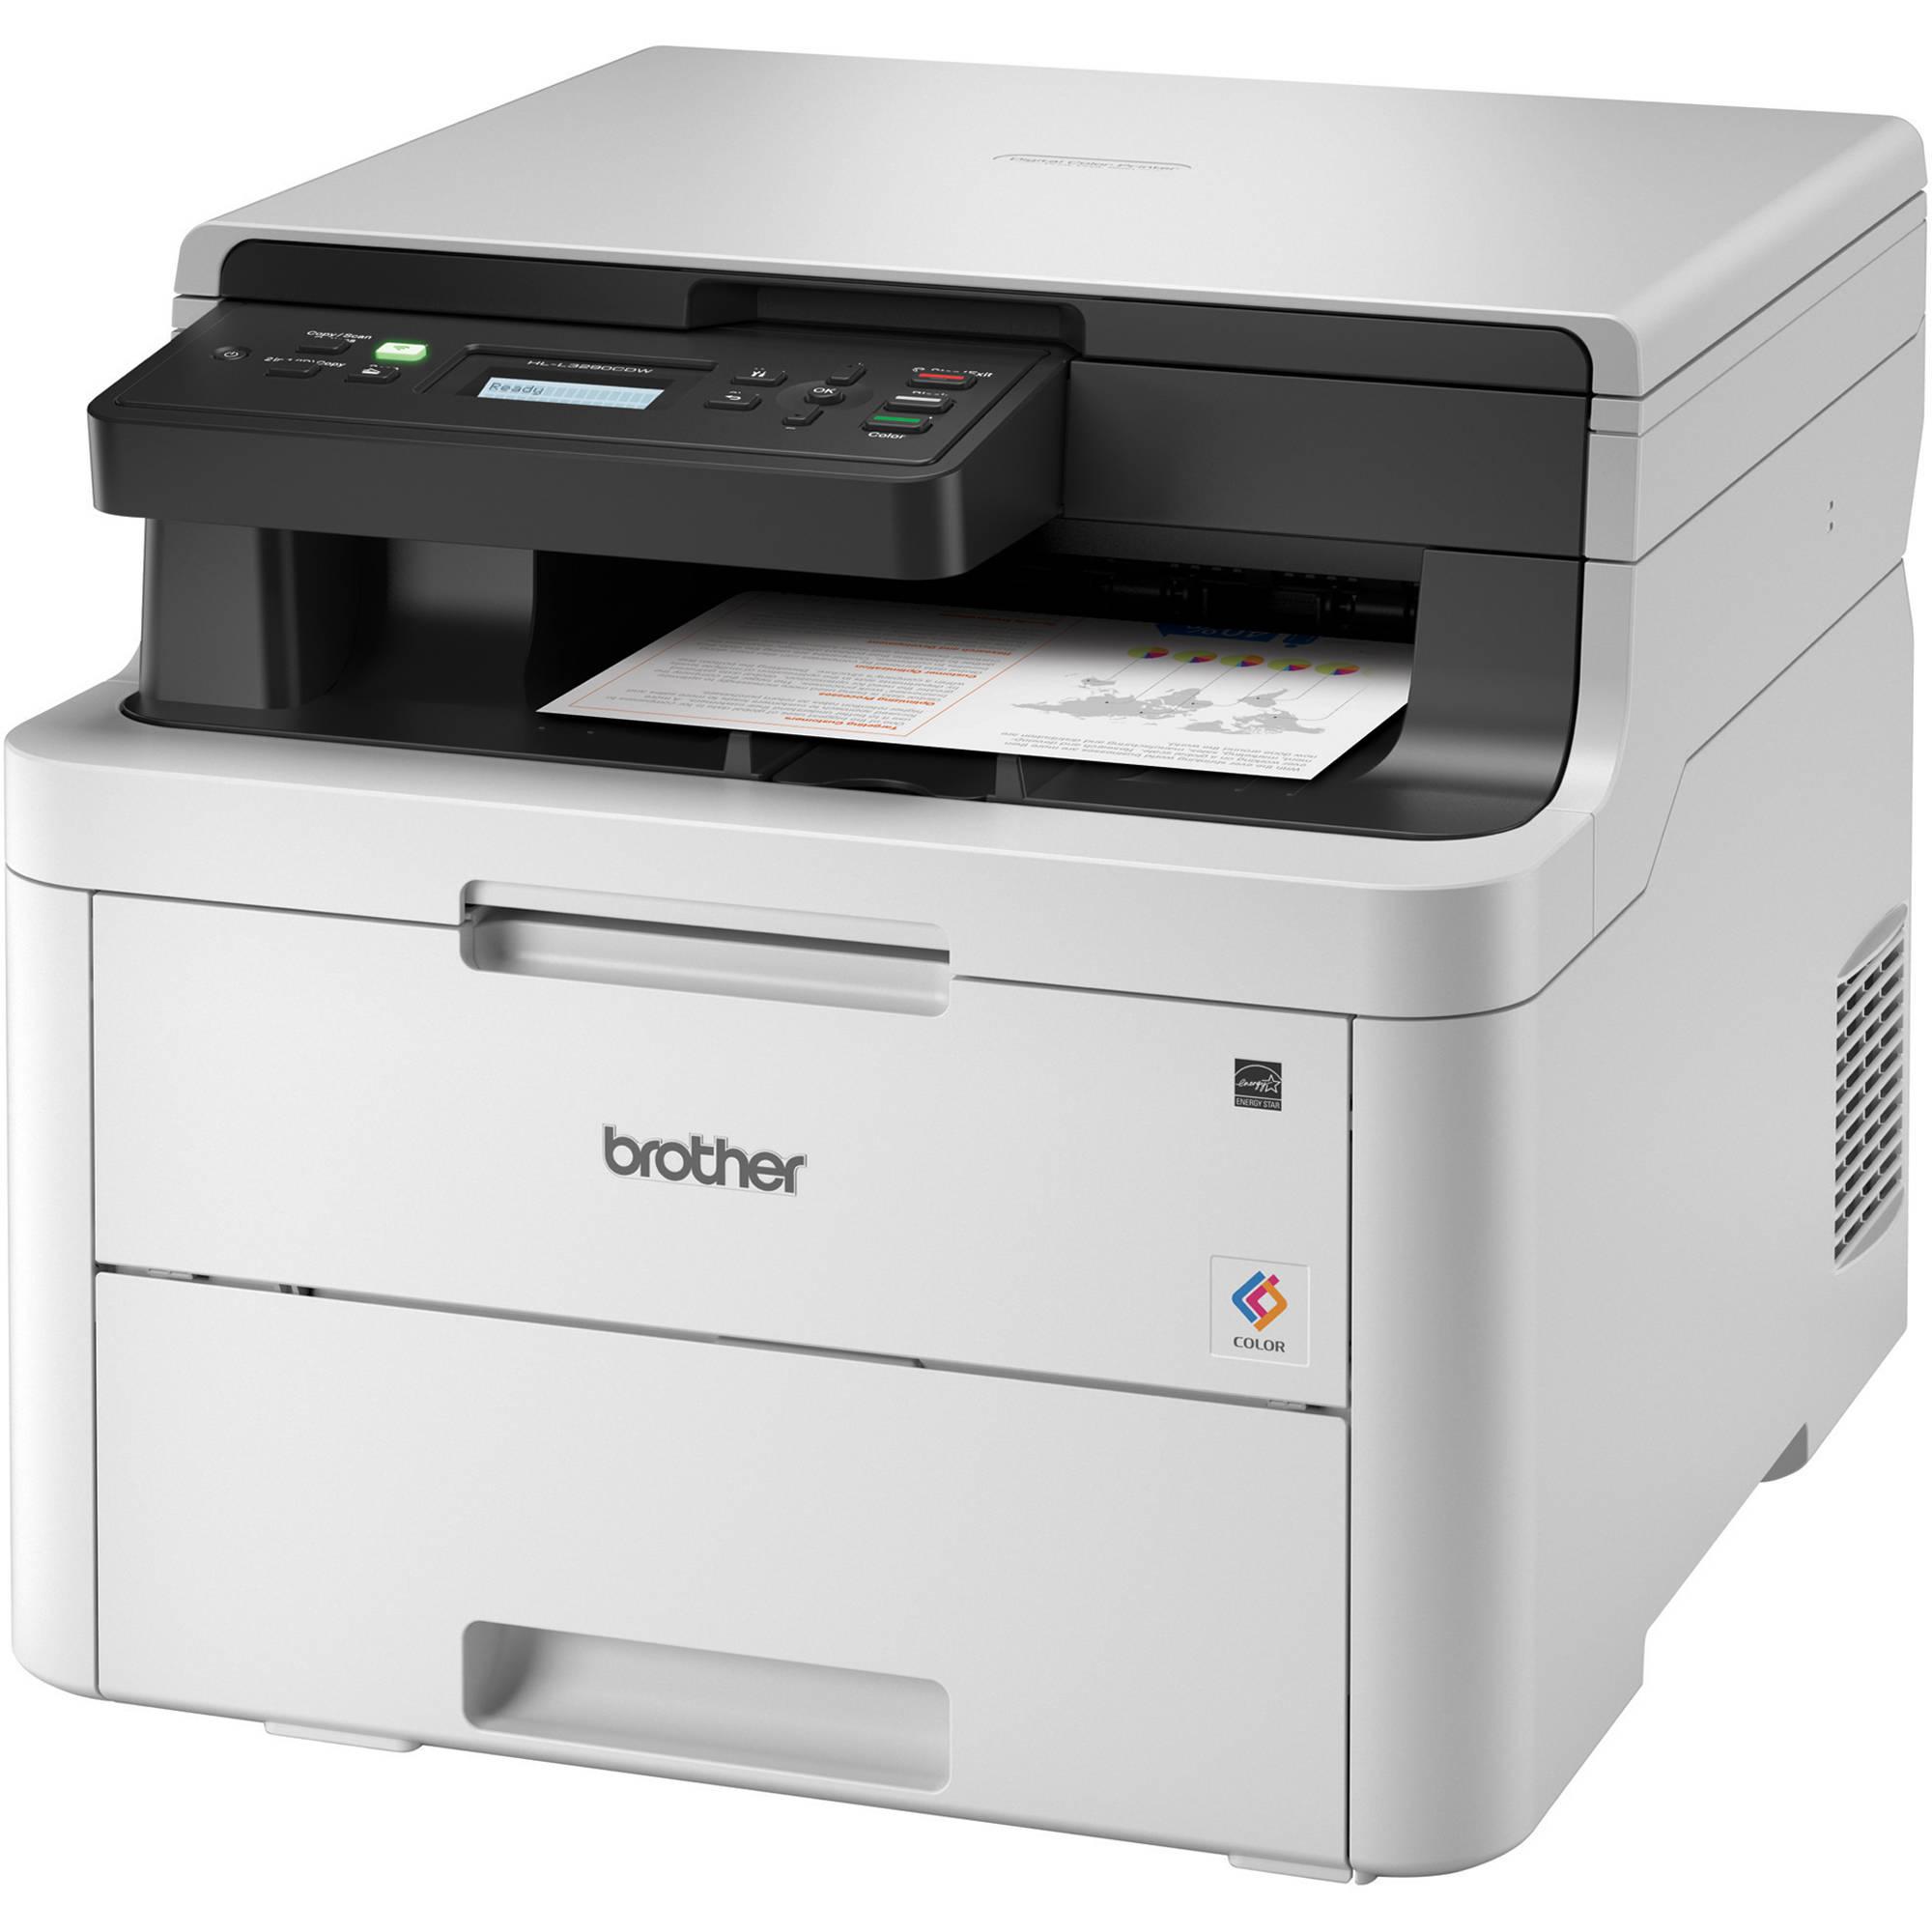 Brother RHLL3290CDW Wireless Color Laser Printer for $280.24 Shipped